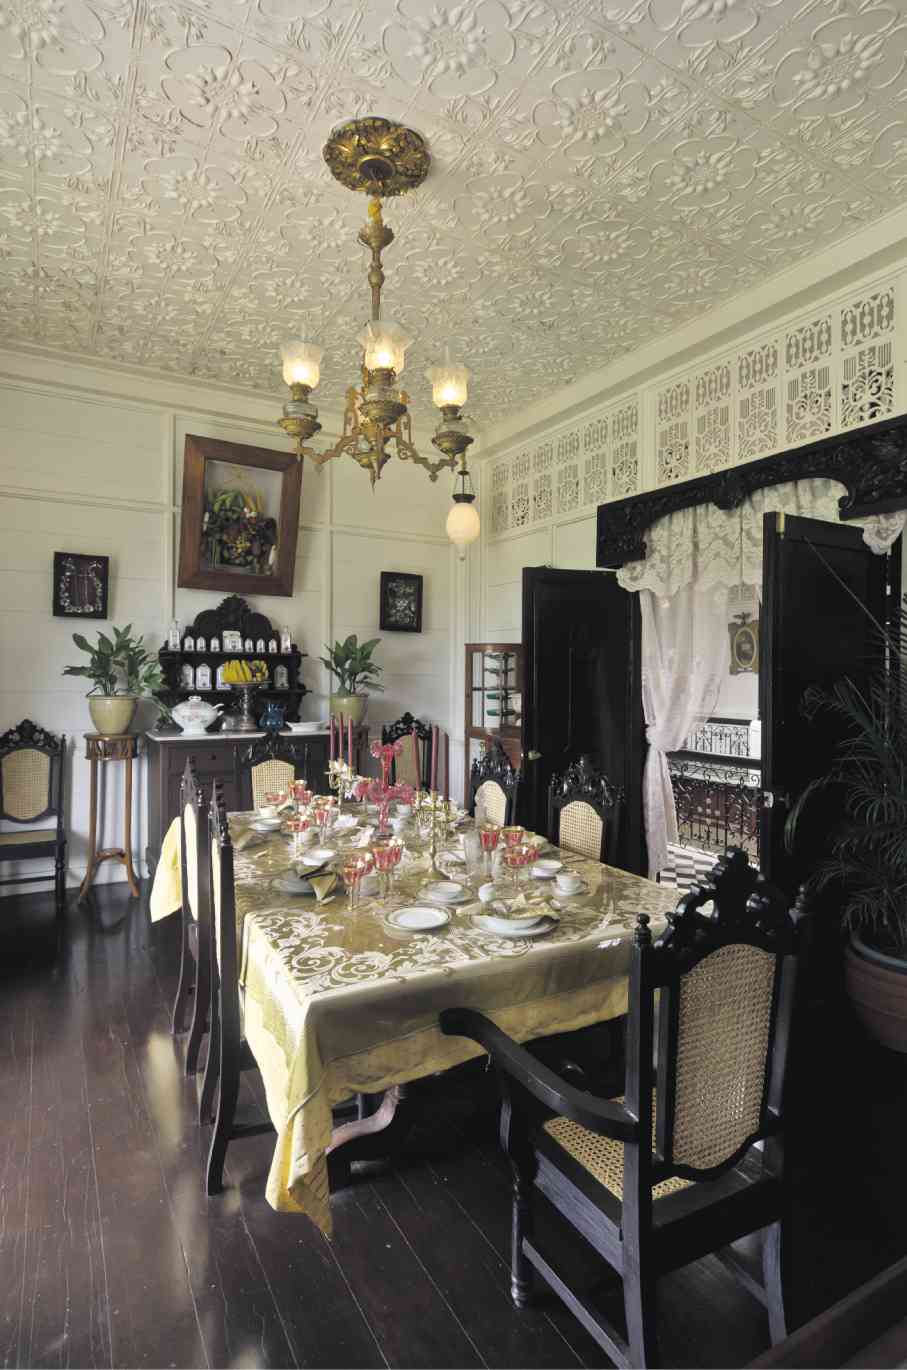 elaborate pressed tin ceiling, cutwork transoms and carved valances in the floral style in the dining room